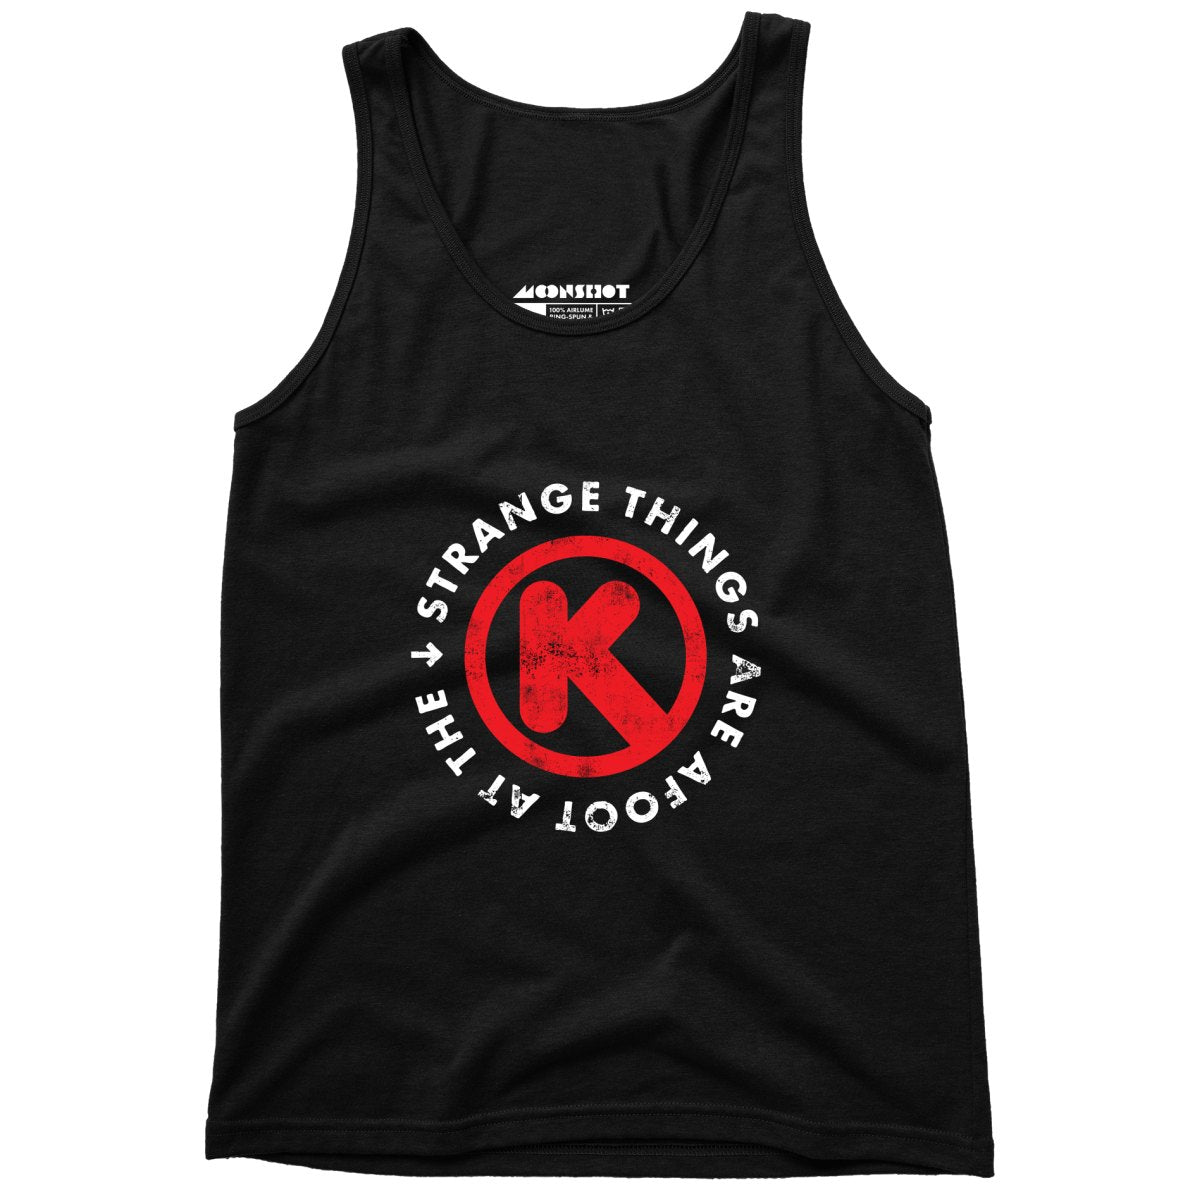 Strange Things are Afoot at the Circle K - Unisex Tank Top